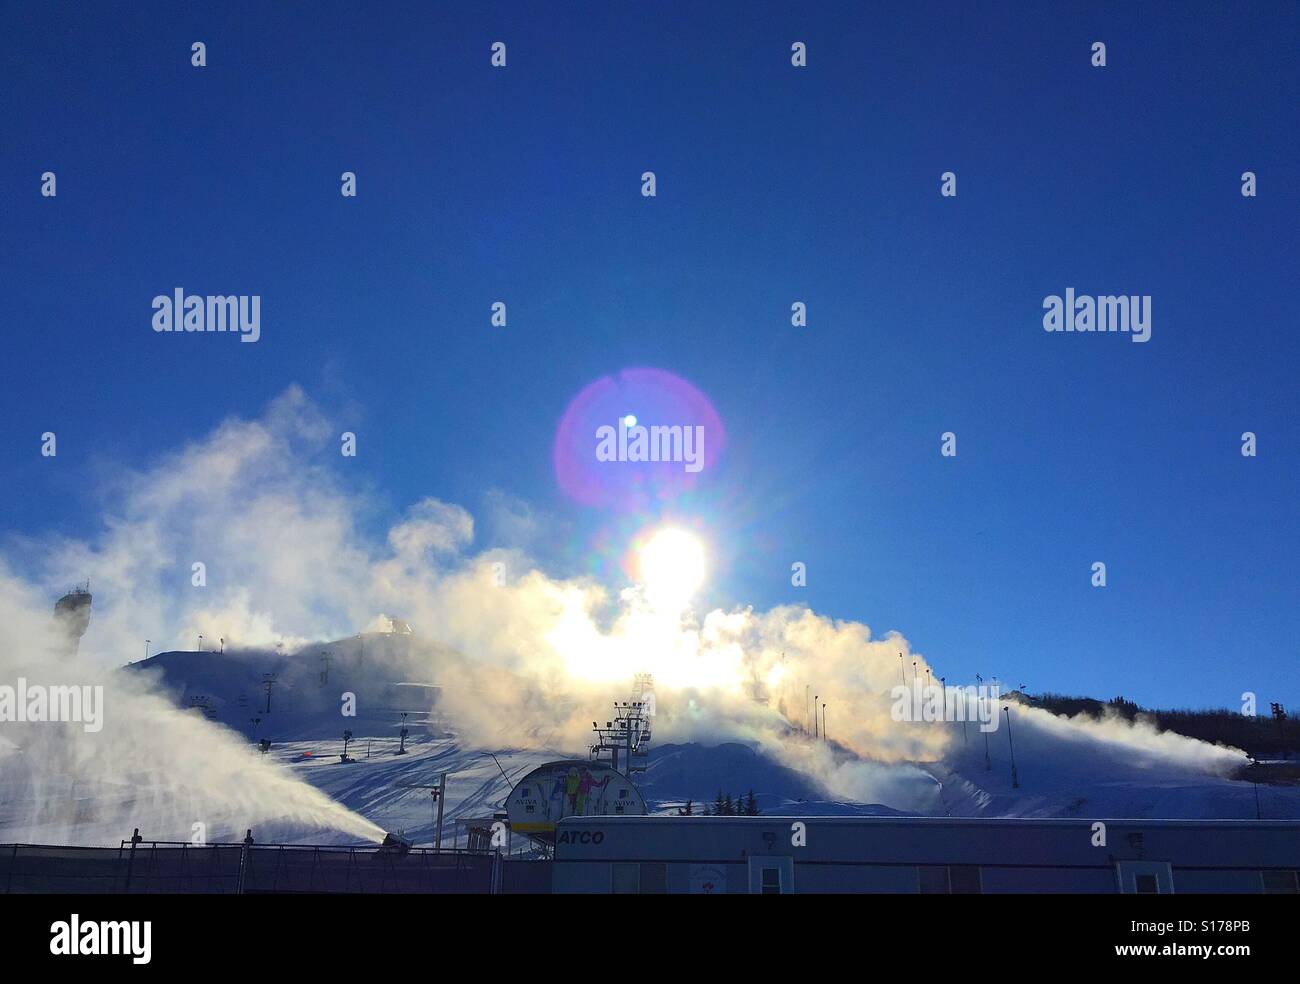 Preparing the ski hill - making snow with bright sun and lens flare in the background Stock Photo